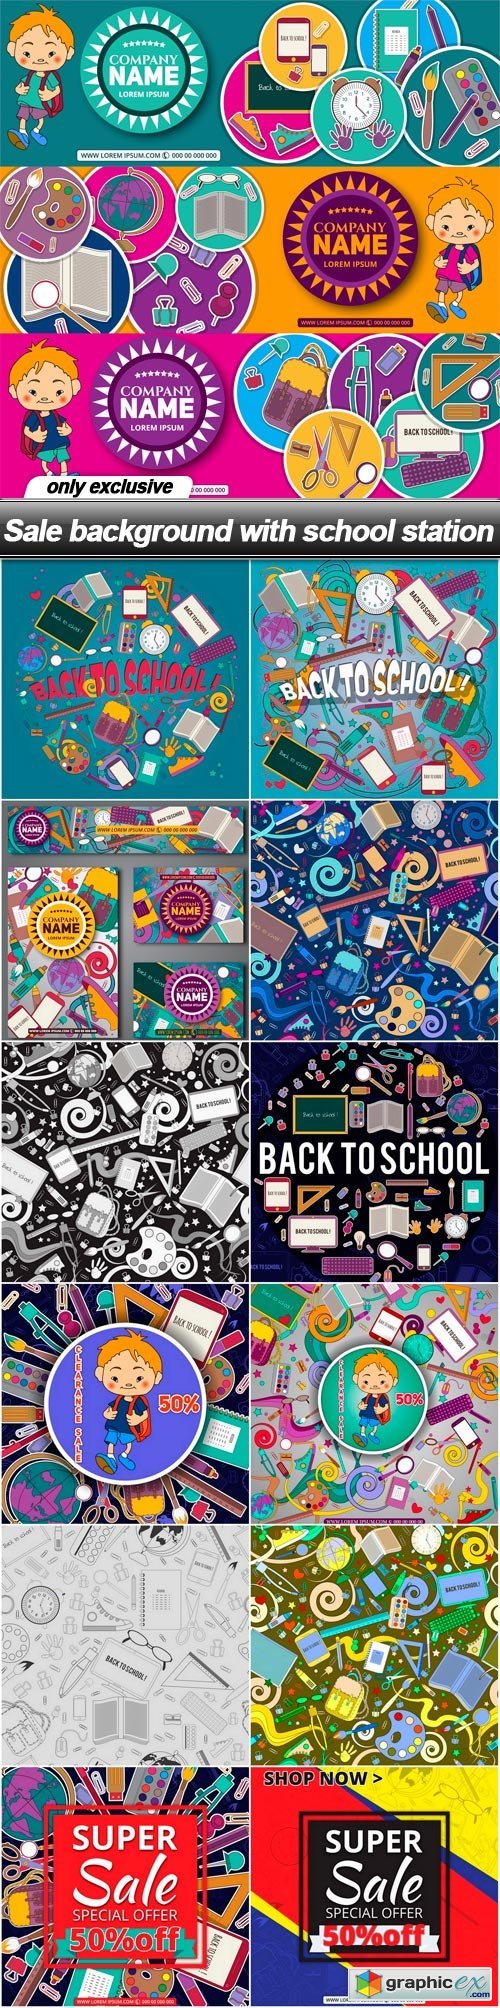 Sale background with school station - 13 EPS